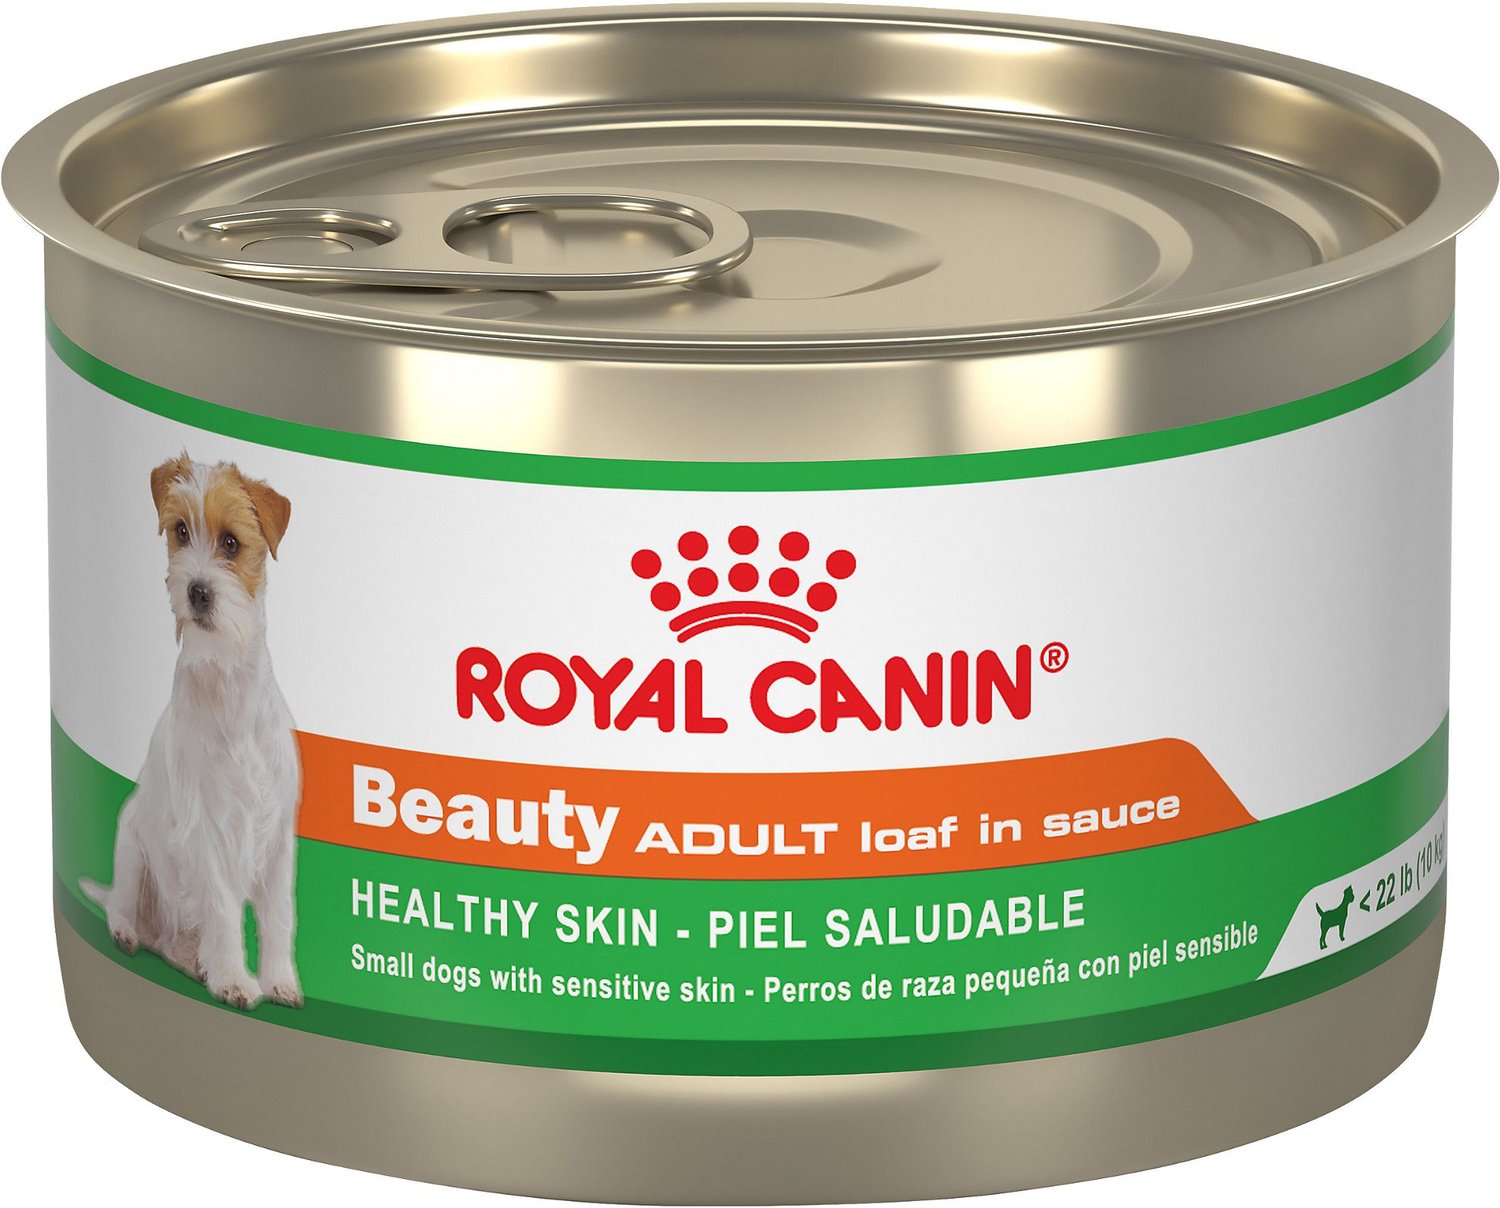 royal-canin-beauty-healthy-skin-adult-canned-dog-food-5-2-oz-case-of